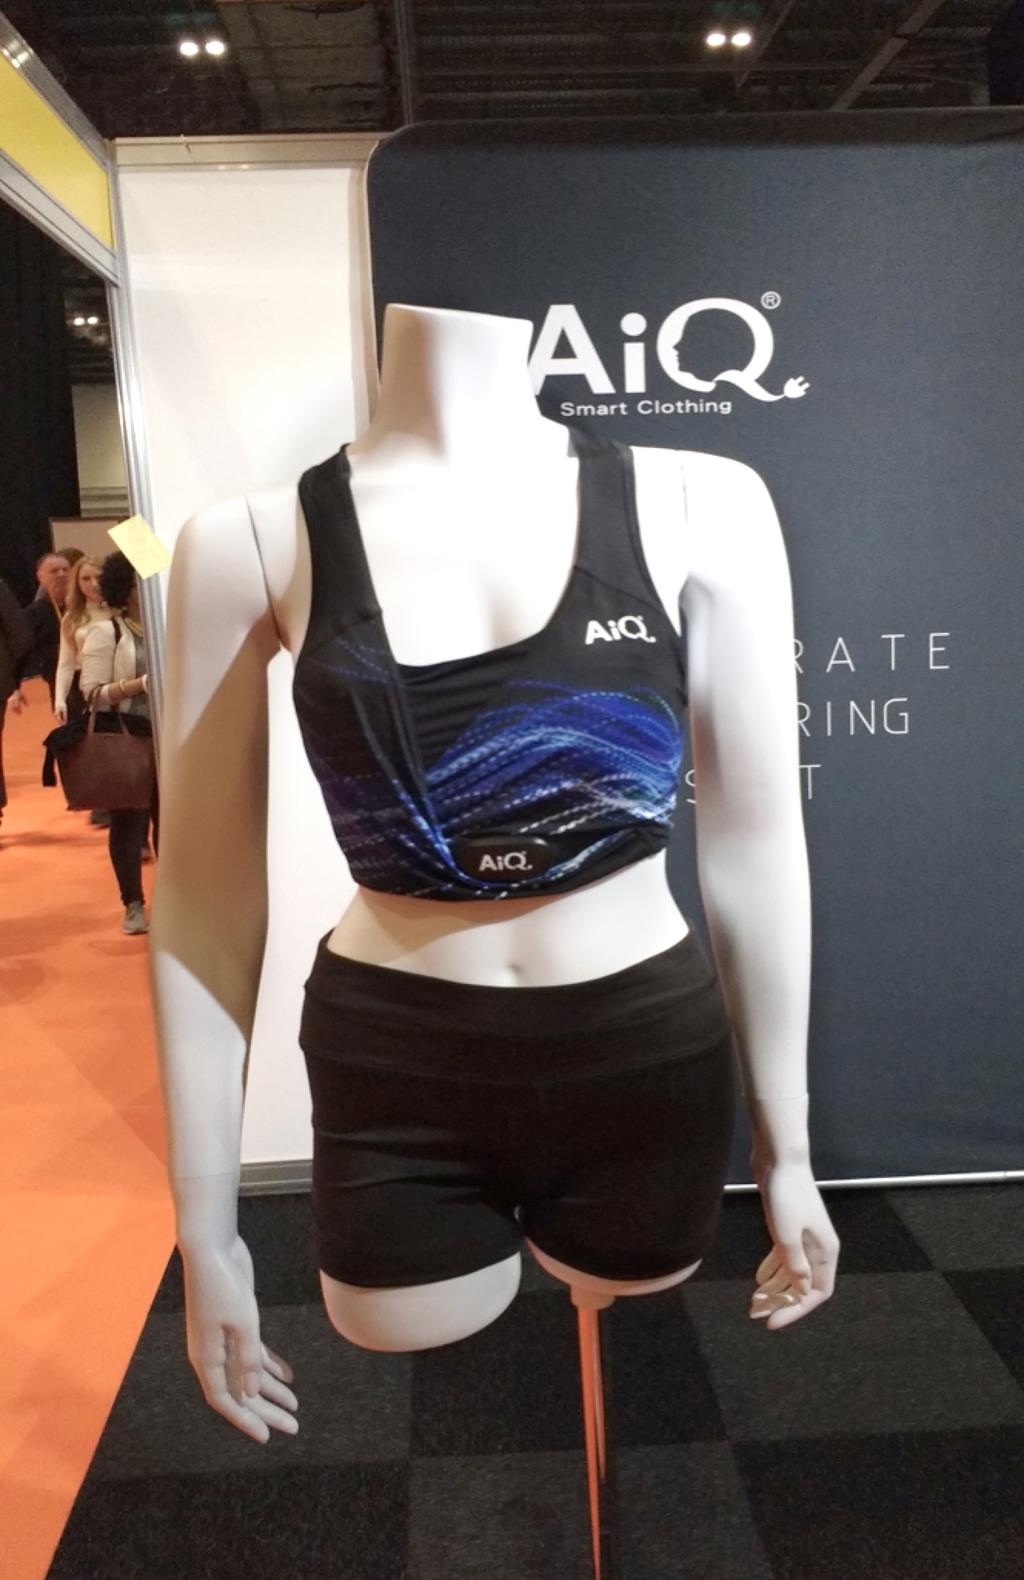 Fashion Companies Will Play a Key Role in MR Adoption On the second day of the show, we attended a panel discussion on the prospects for MR, which is an evolution of AR and VR technologies: AR